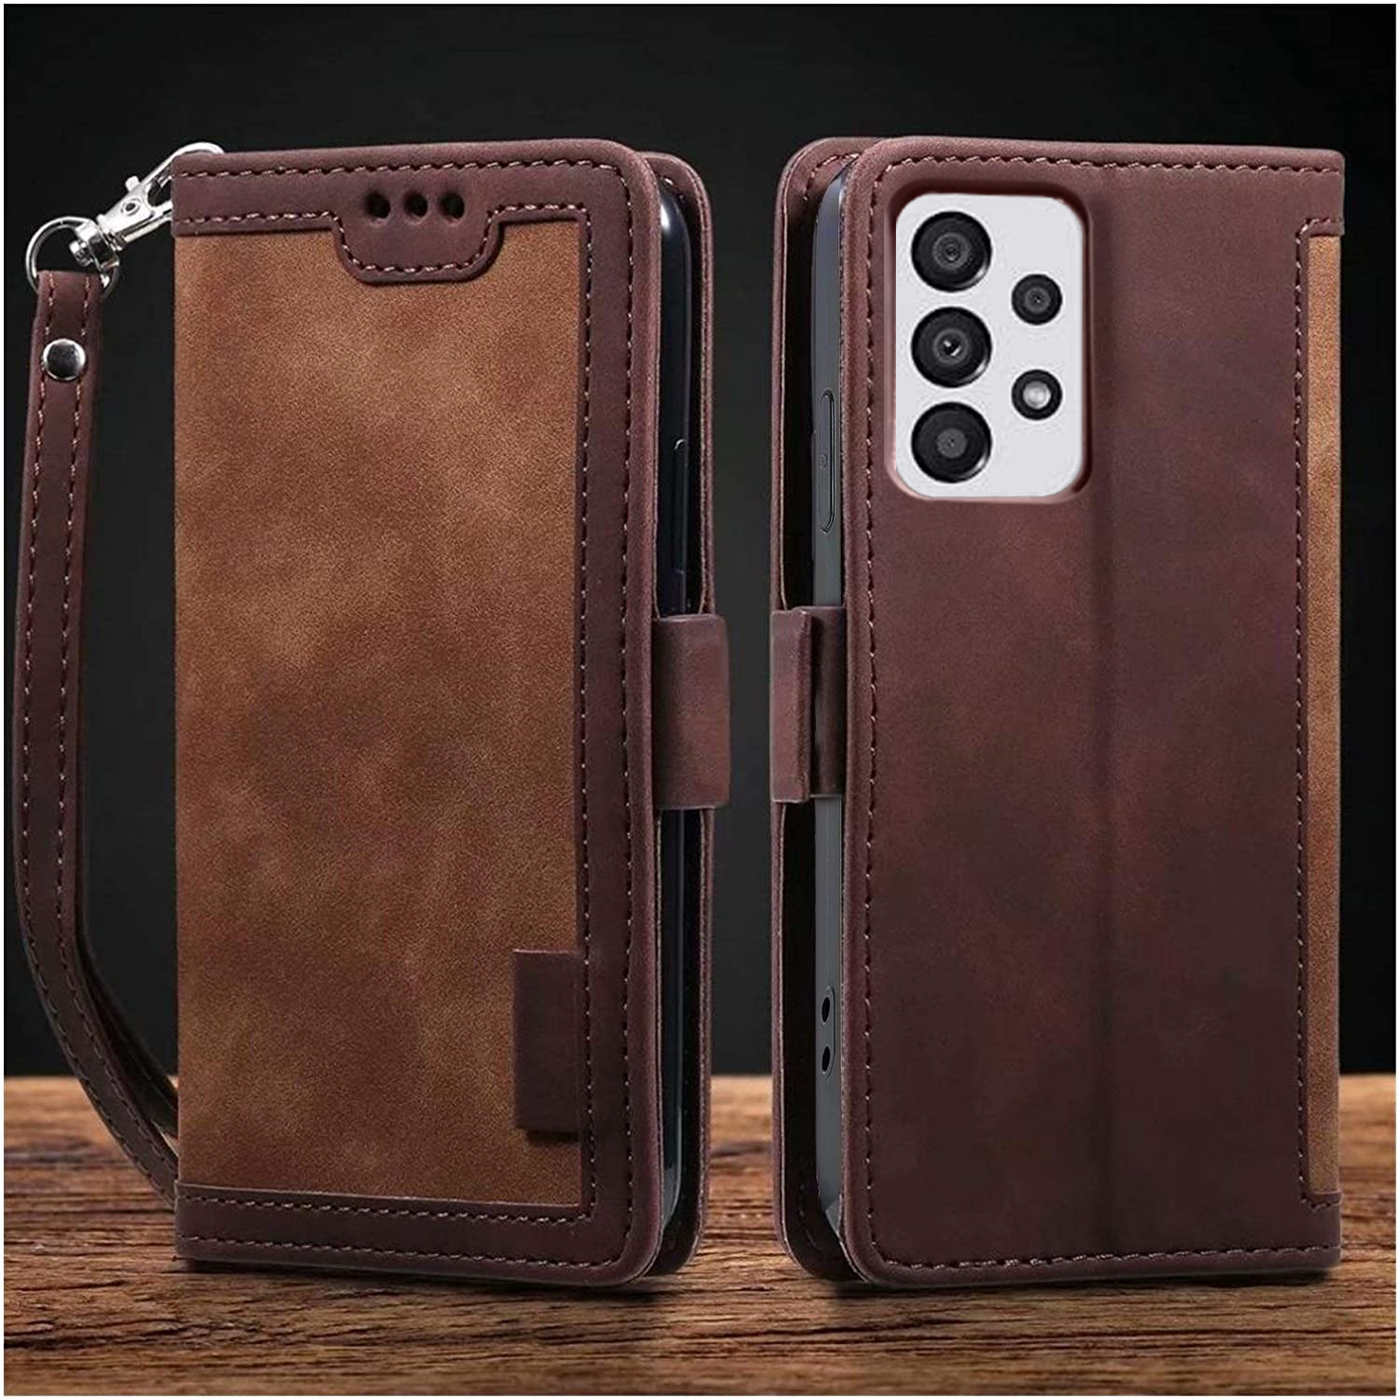 Samsung Galaxy A33 coffee color leather wallet flip cover case By excelsior